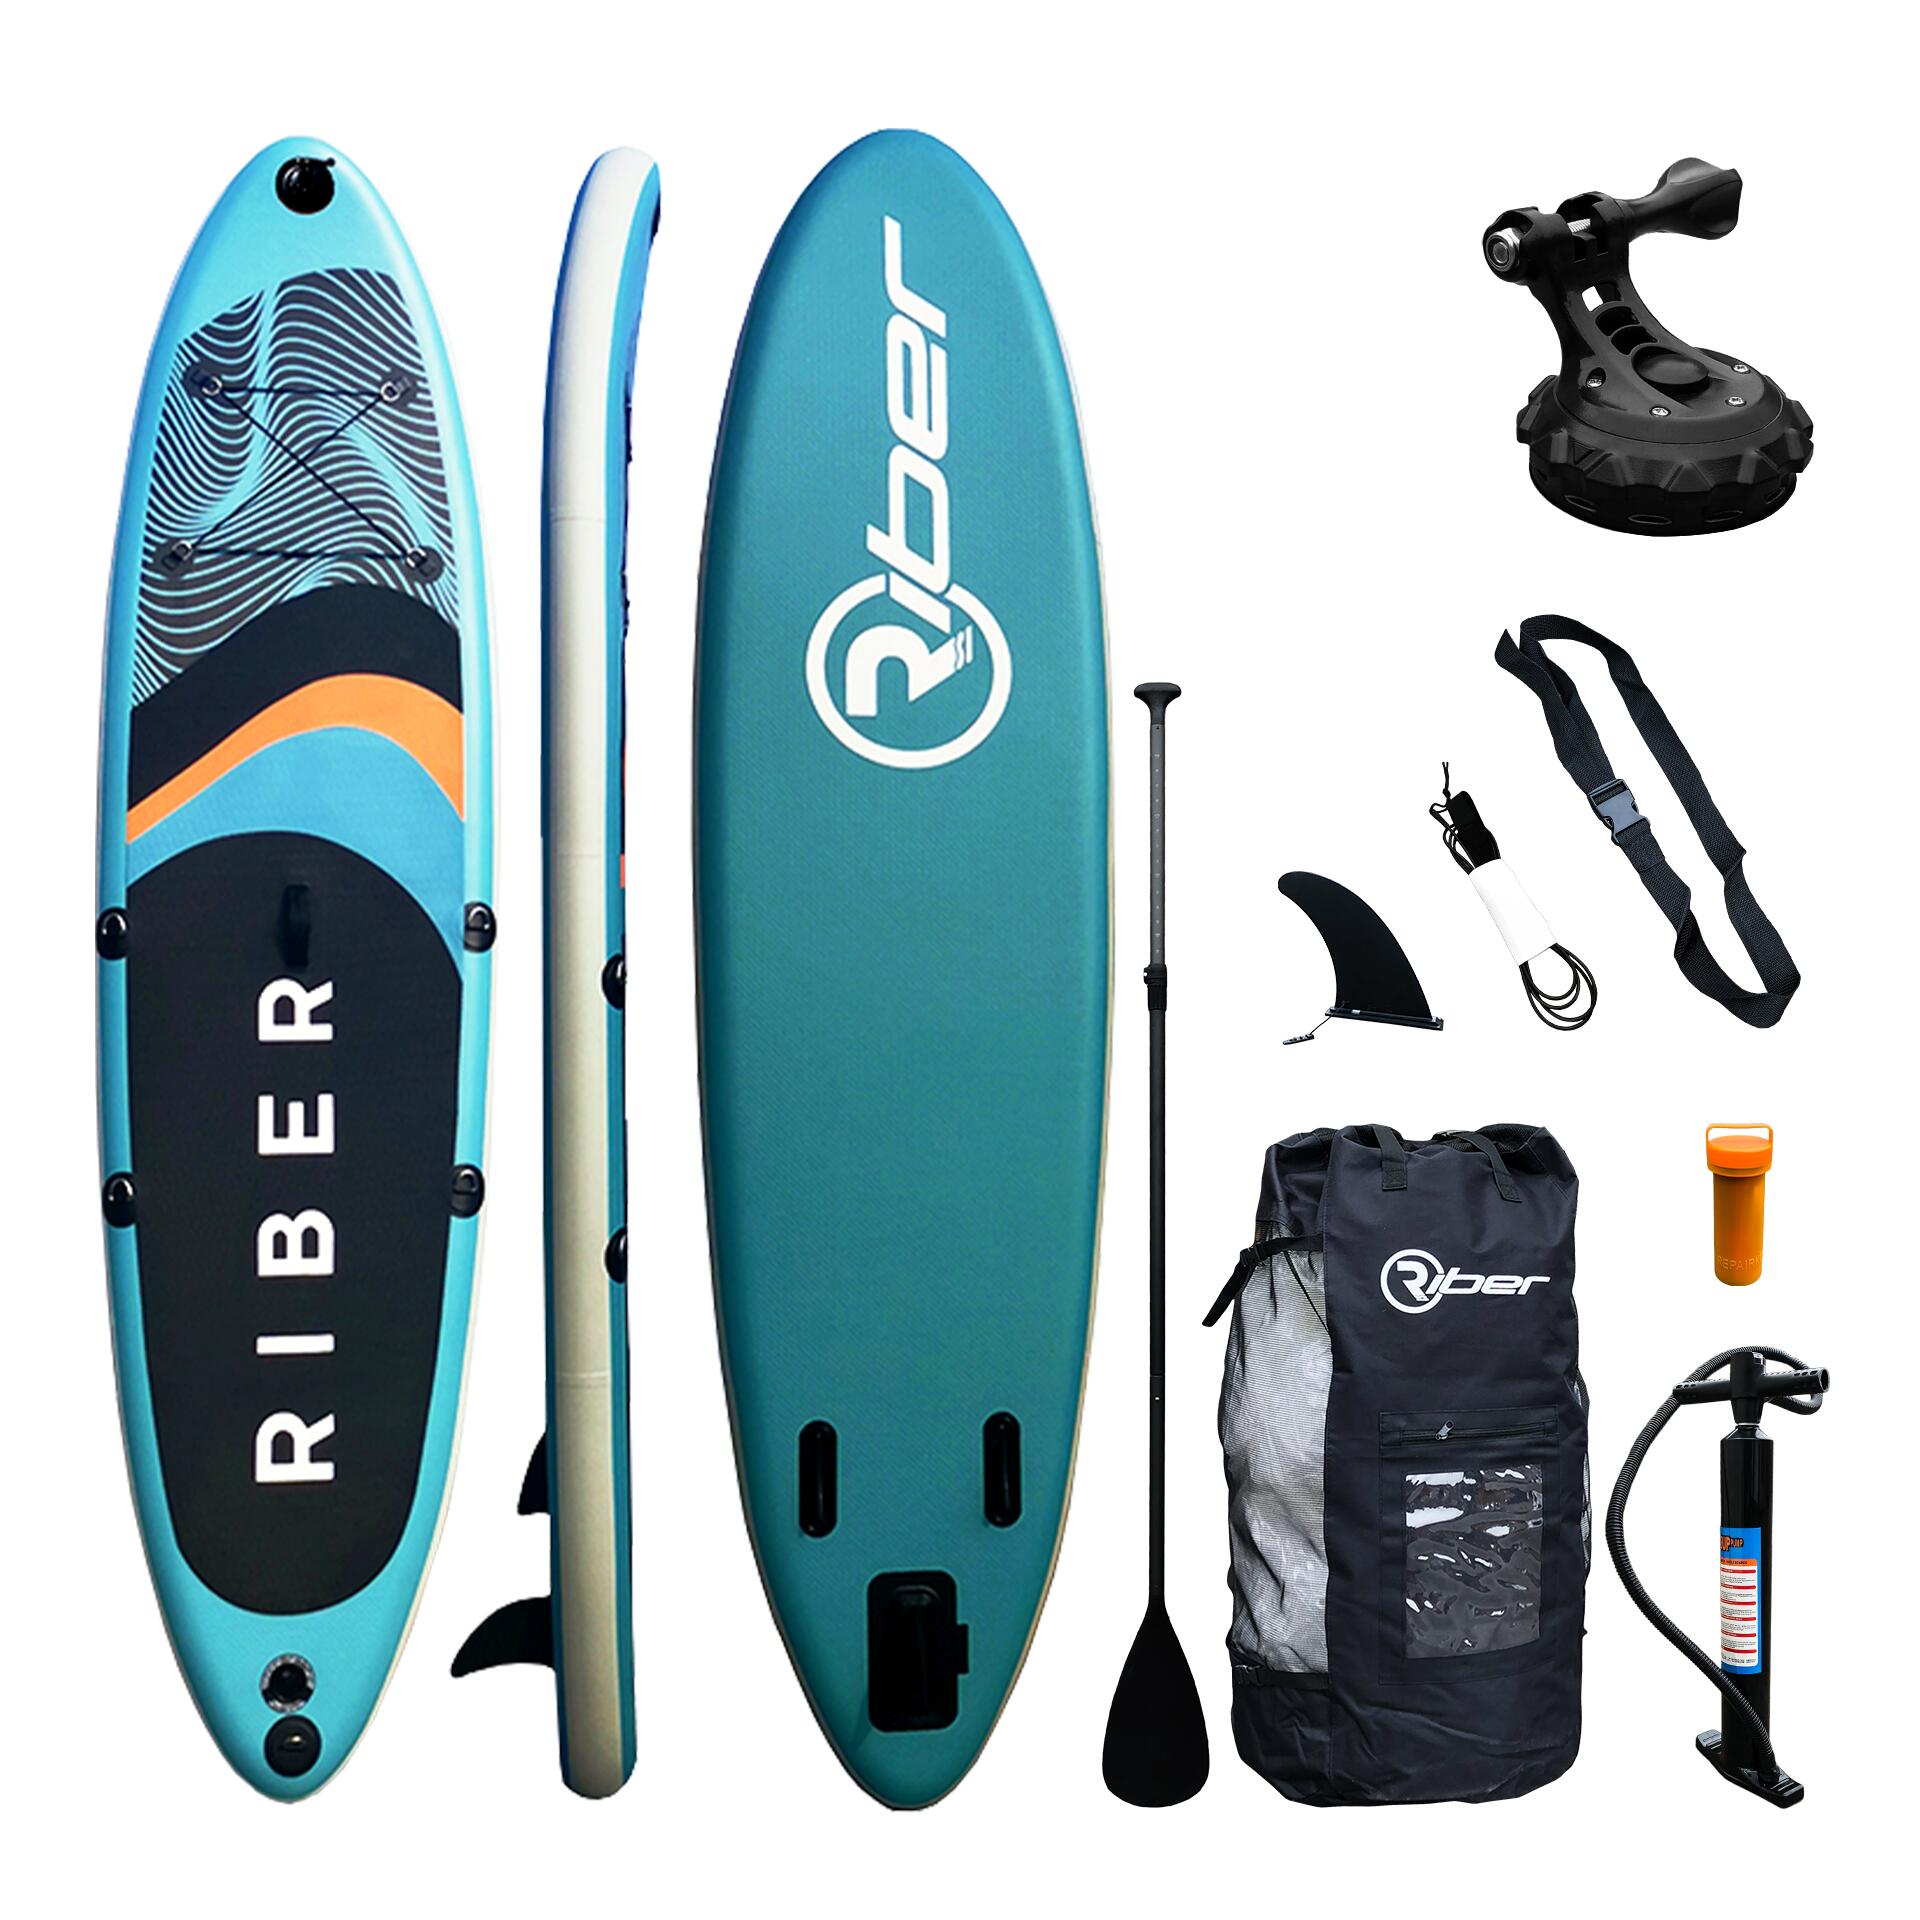 RIBER RIBER 322 iSUP 10'6" PACKAGE WITH ACCESSORY PACK